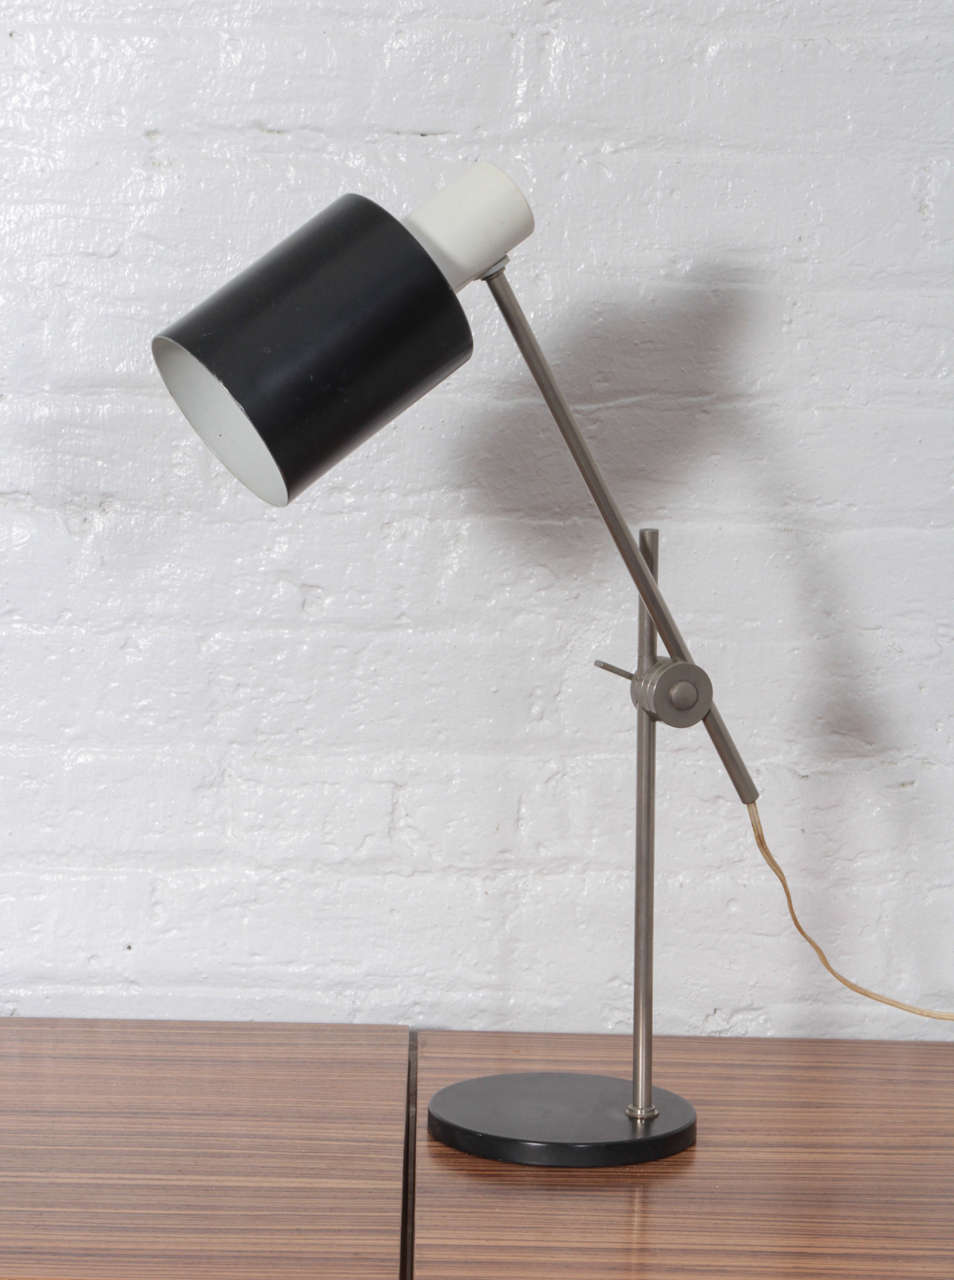 Nice minimalistic and Industrial shaped Dutch desk lamp. Rare model produced by the famous Mid-Century lighting company Hala Zeist.